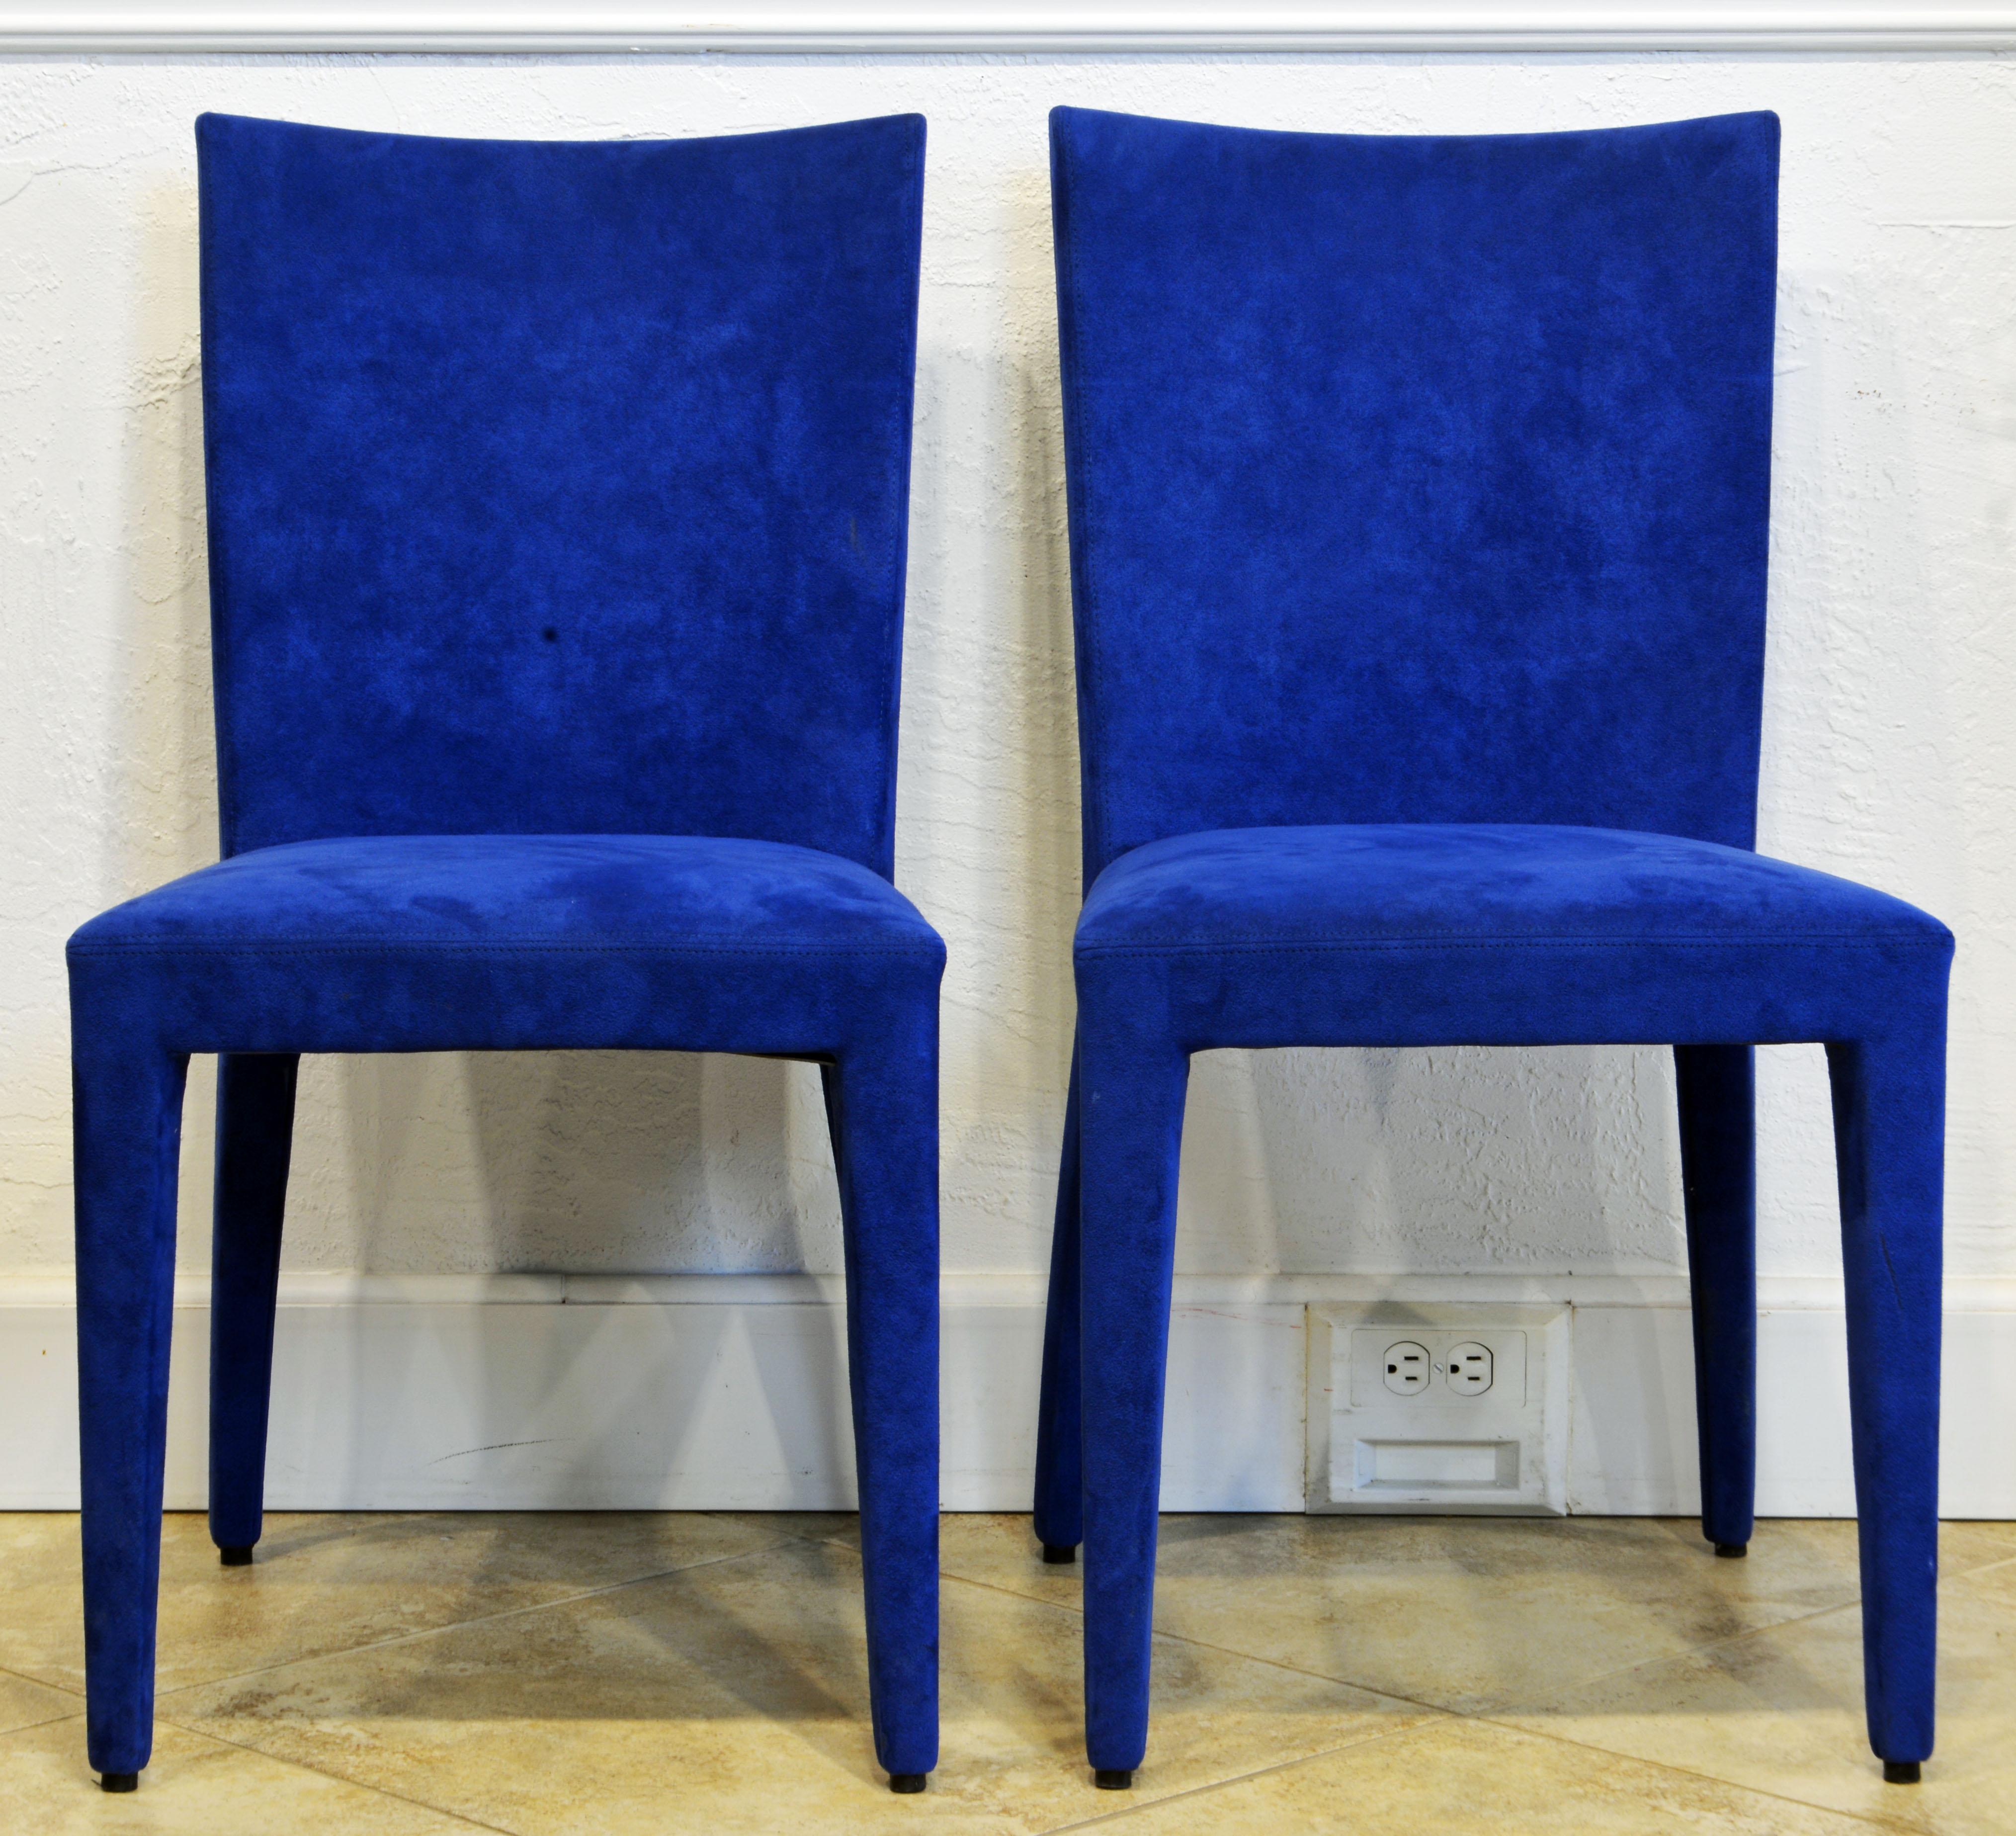 Great design and craftsmanship by legendary Roche Bobois, Paris. Covered over all in radiant blue stitched suede these side chairs make a contemporary design statement.